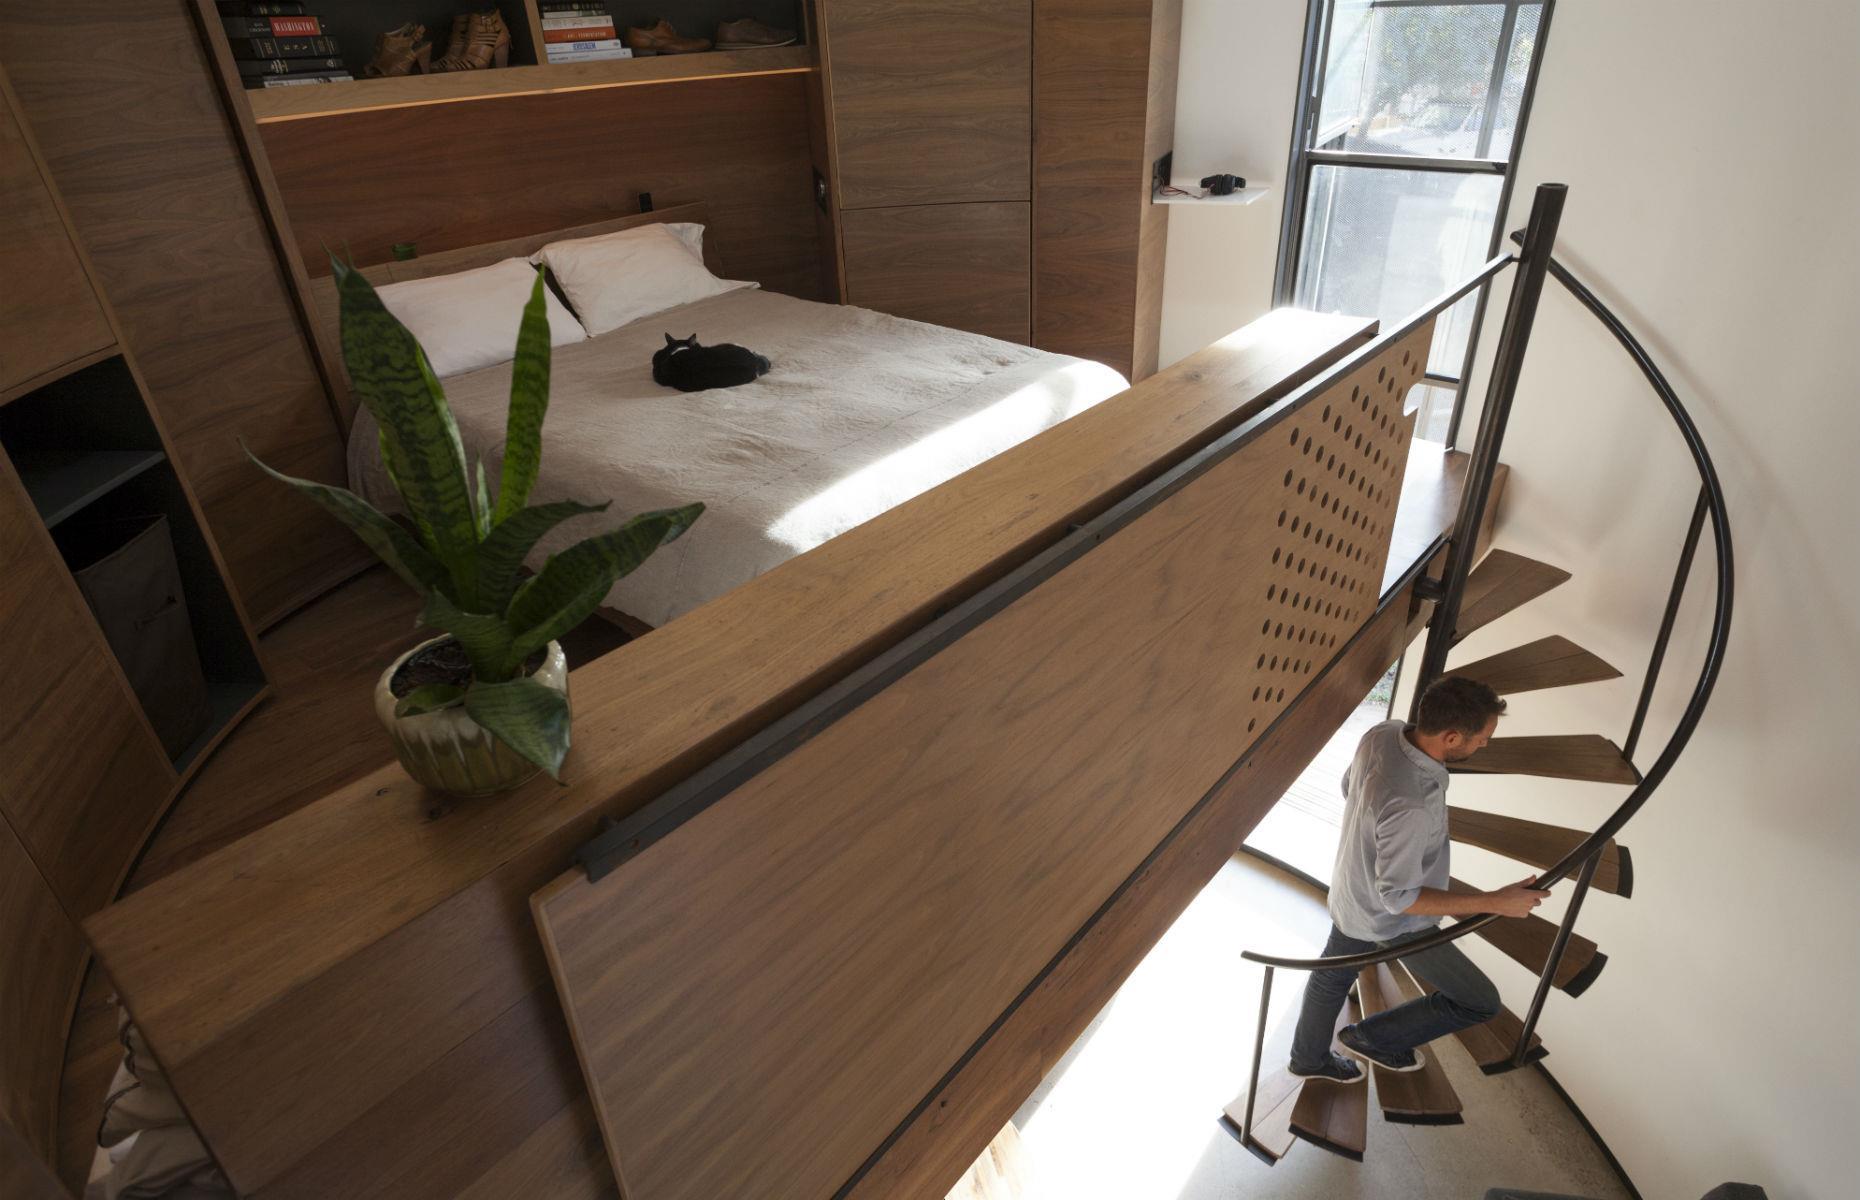 <p>With just 340 square feet to work with, every space needed a purpose, so Christoph opted to use the full height and volume of the silo, creating an arc of units against one wall to free up the remaining floor area.</p>  <p>A space-saving spiral staircase leads to the mezzanine bedroom, which offers standing room at either side of the bespoke bed, while the home's bijou bathroom includes a shower, a basin and a toilet.</p>